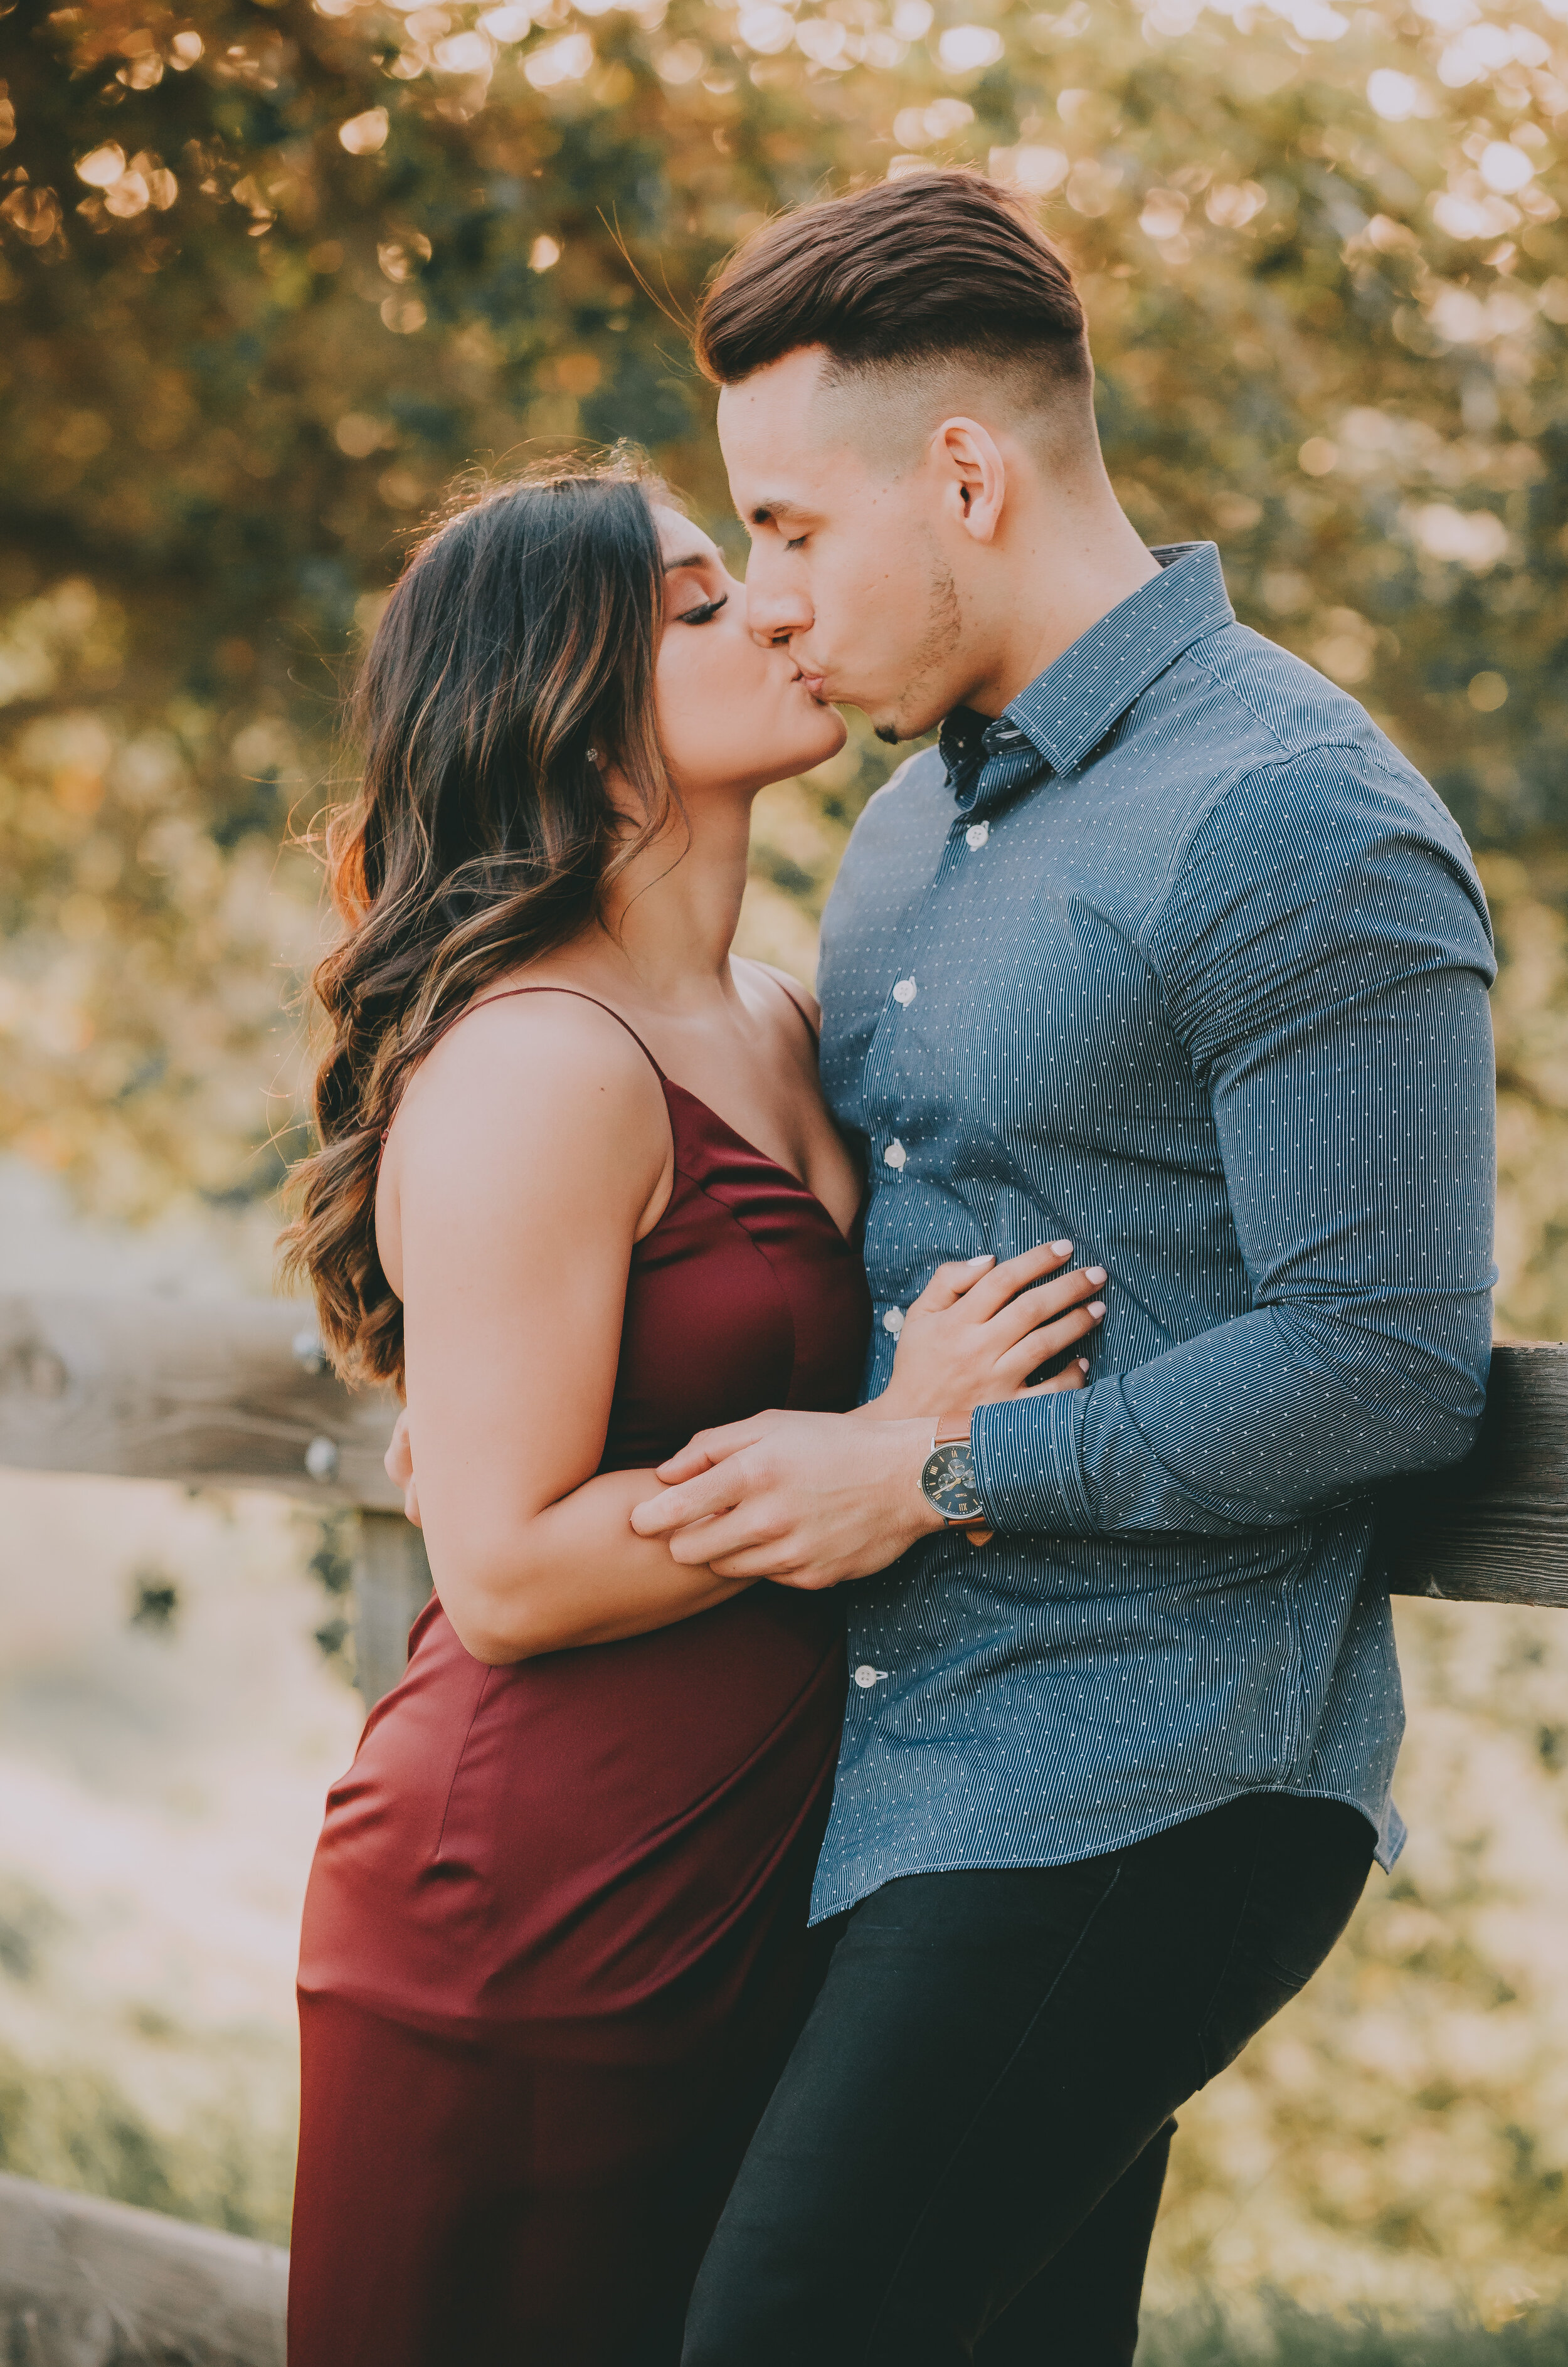 Fresno Engagament Photos - The Clausen Gallery - Samantha and Jesus-20.jpg